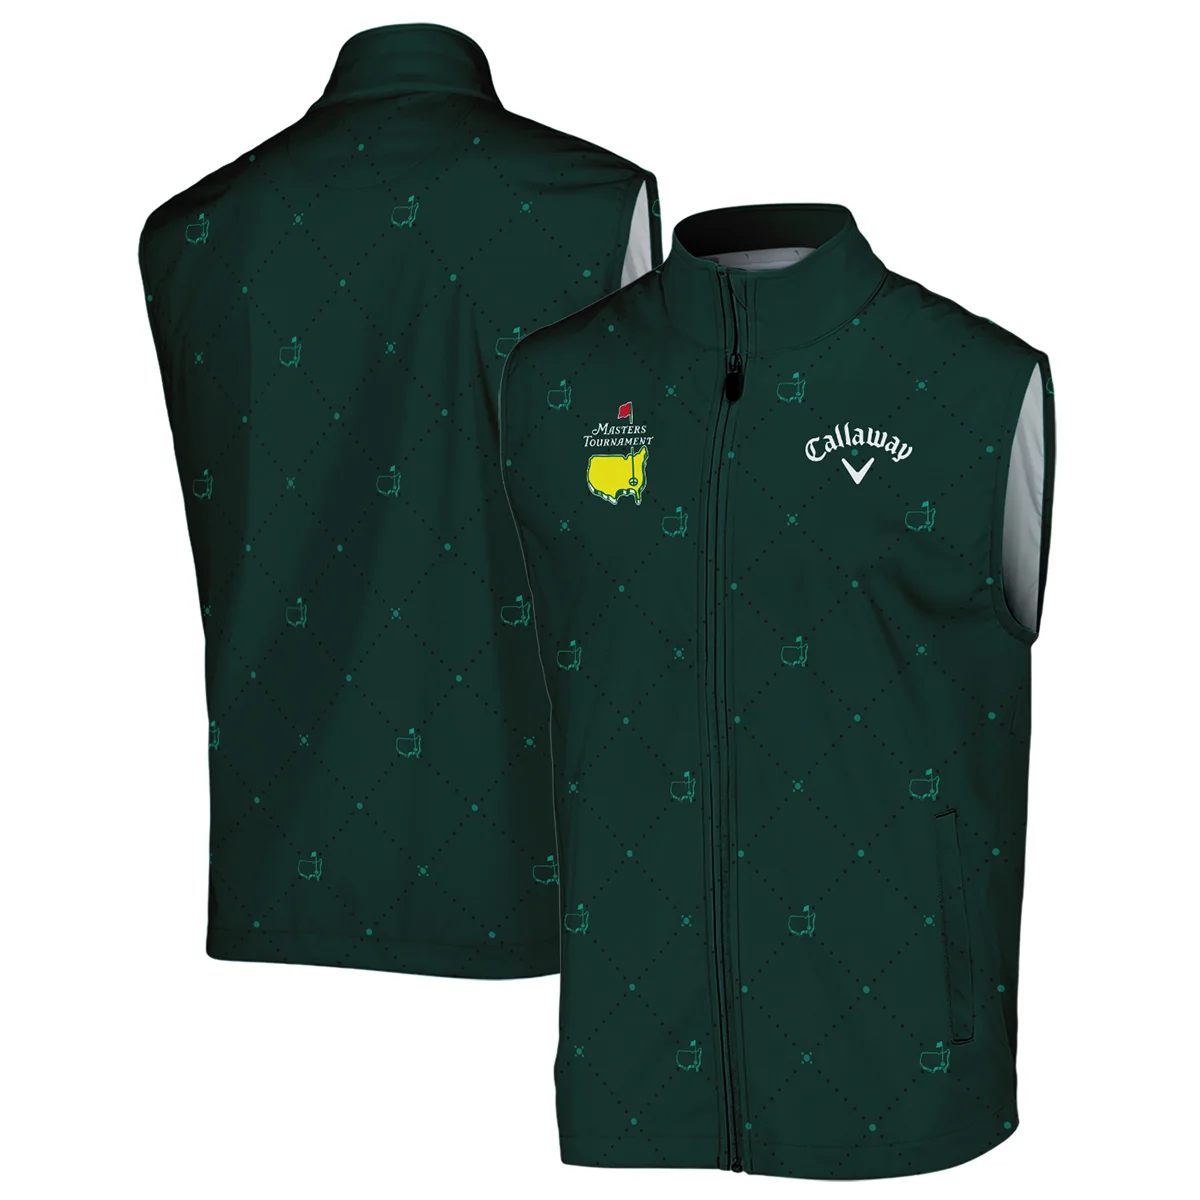 Dark Green Pattern In Retro Style With Logo Masters Tournament Callaway Vneck Long Polo Shirt Style Classic Long Polo Shirt For Men